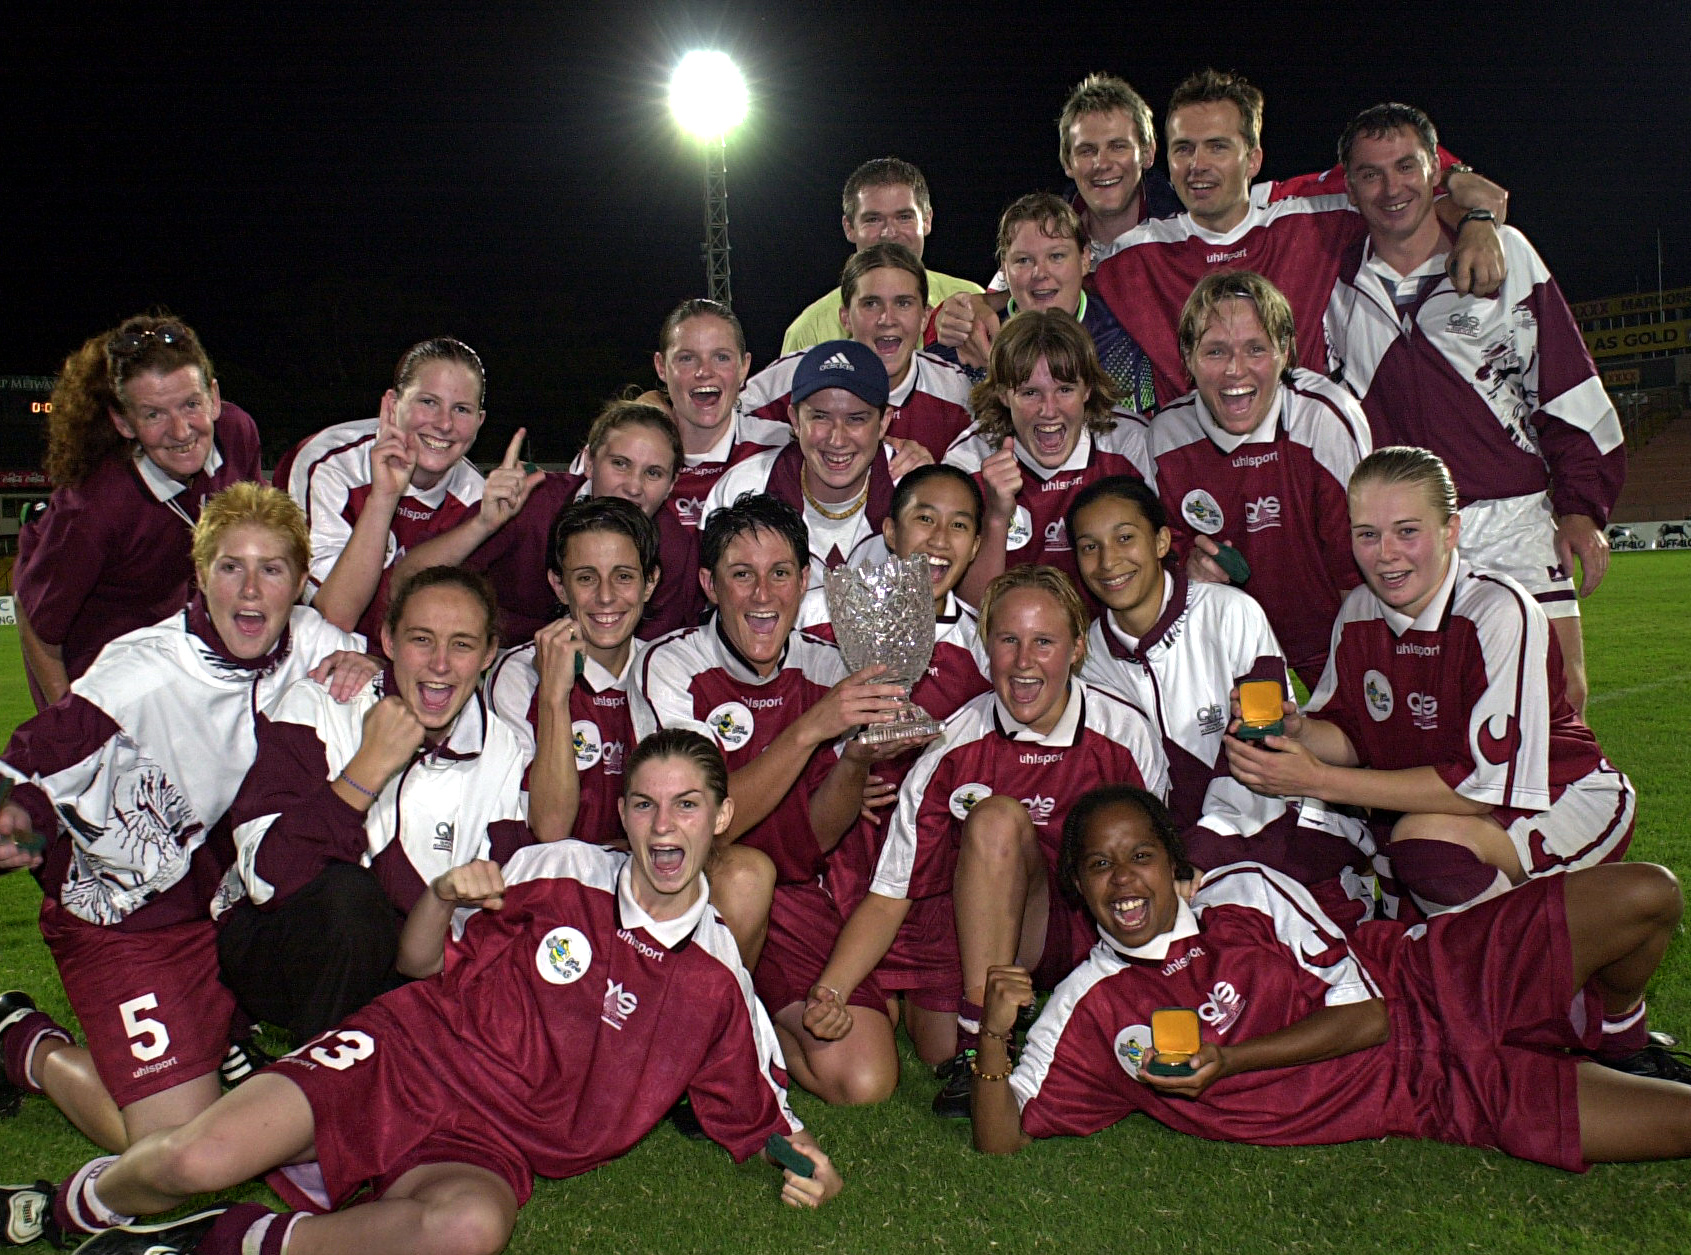 Queensland Sting celebrate winning the Grand Final of the Women's National Soccer League against New South Wales Sapphires at Suncorp Stadium in 2000 in Brisbane, Australia.